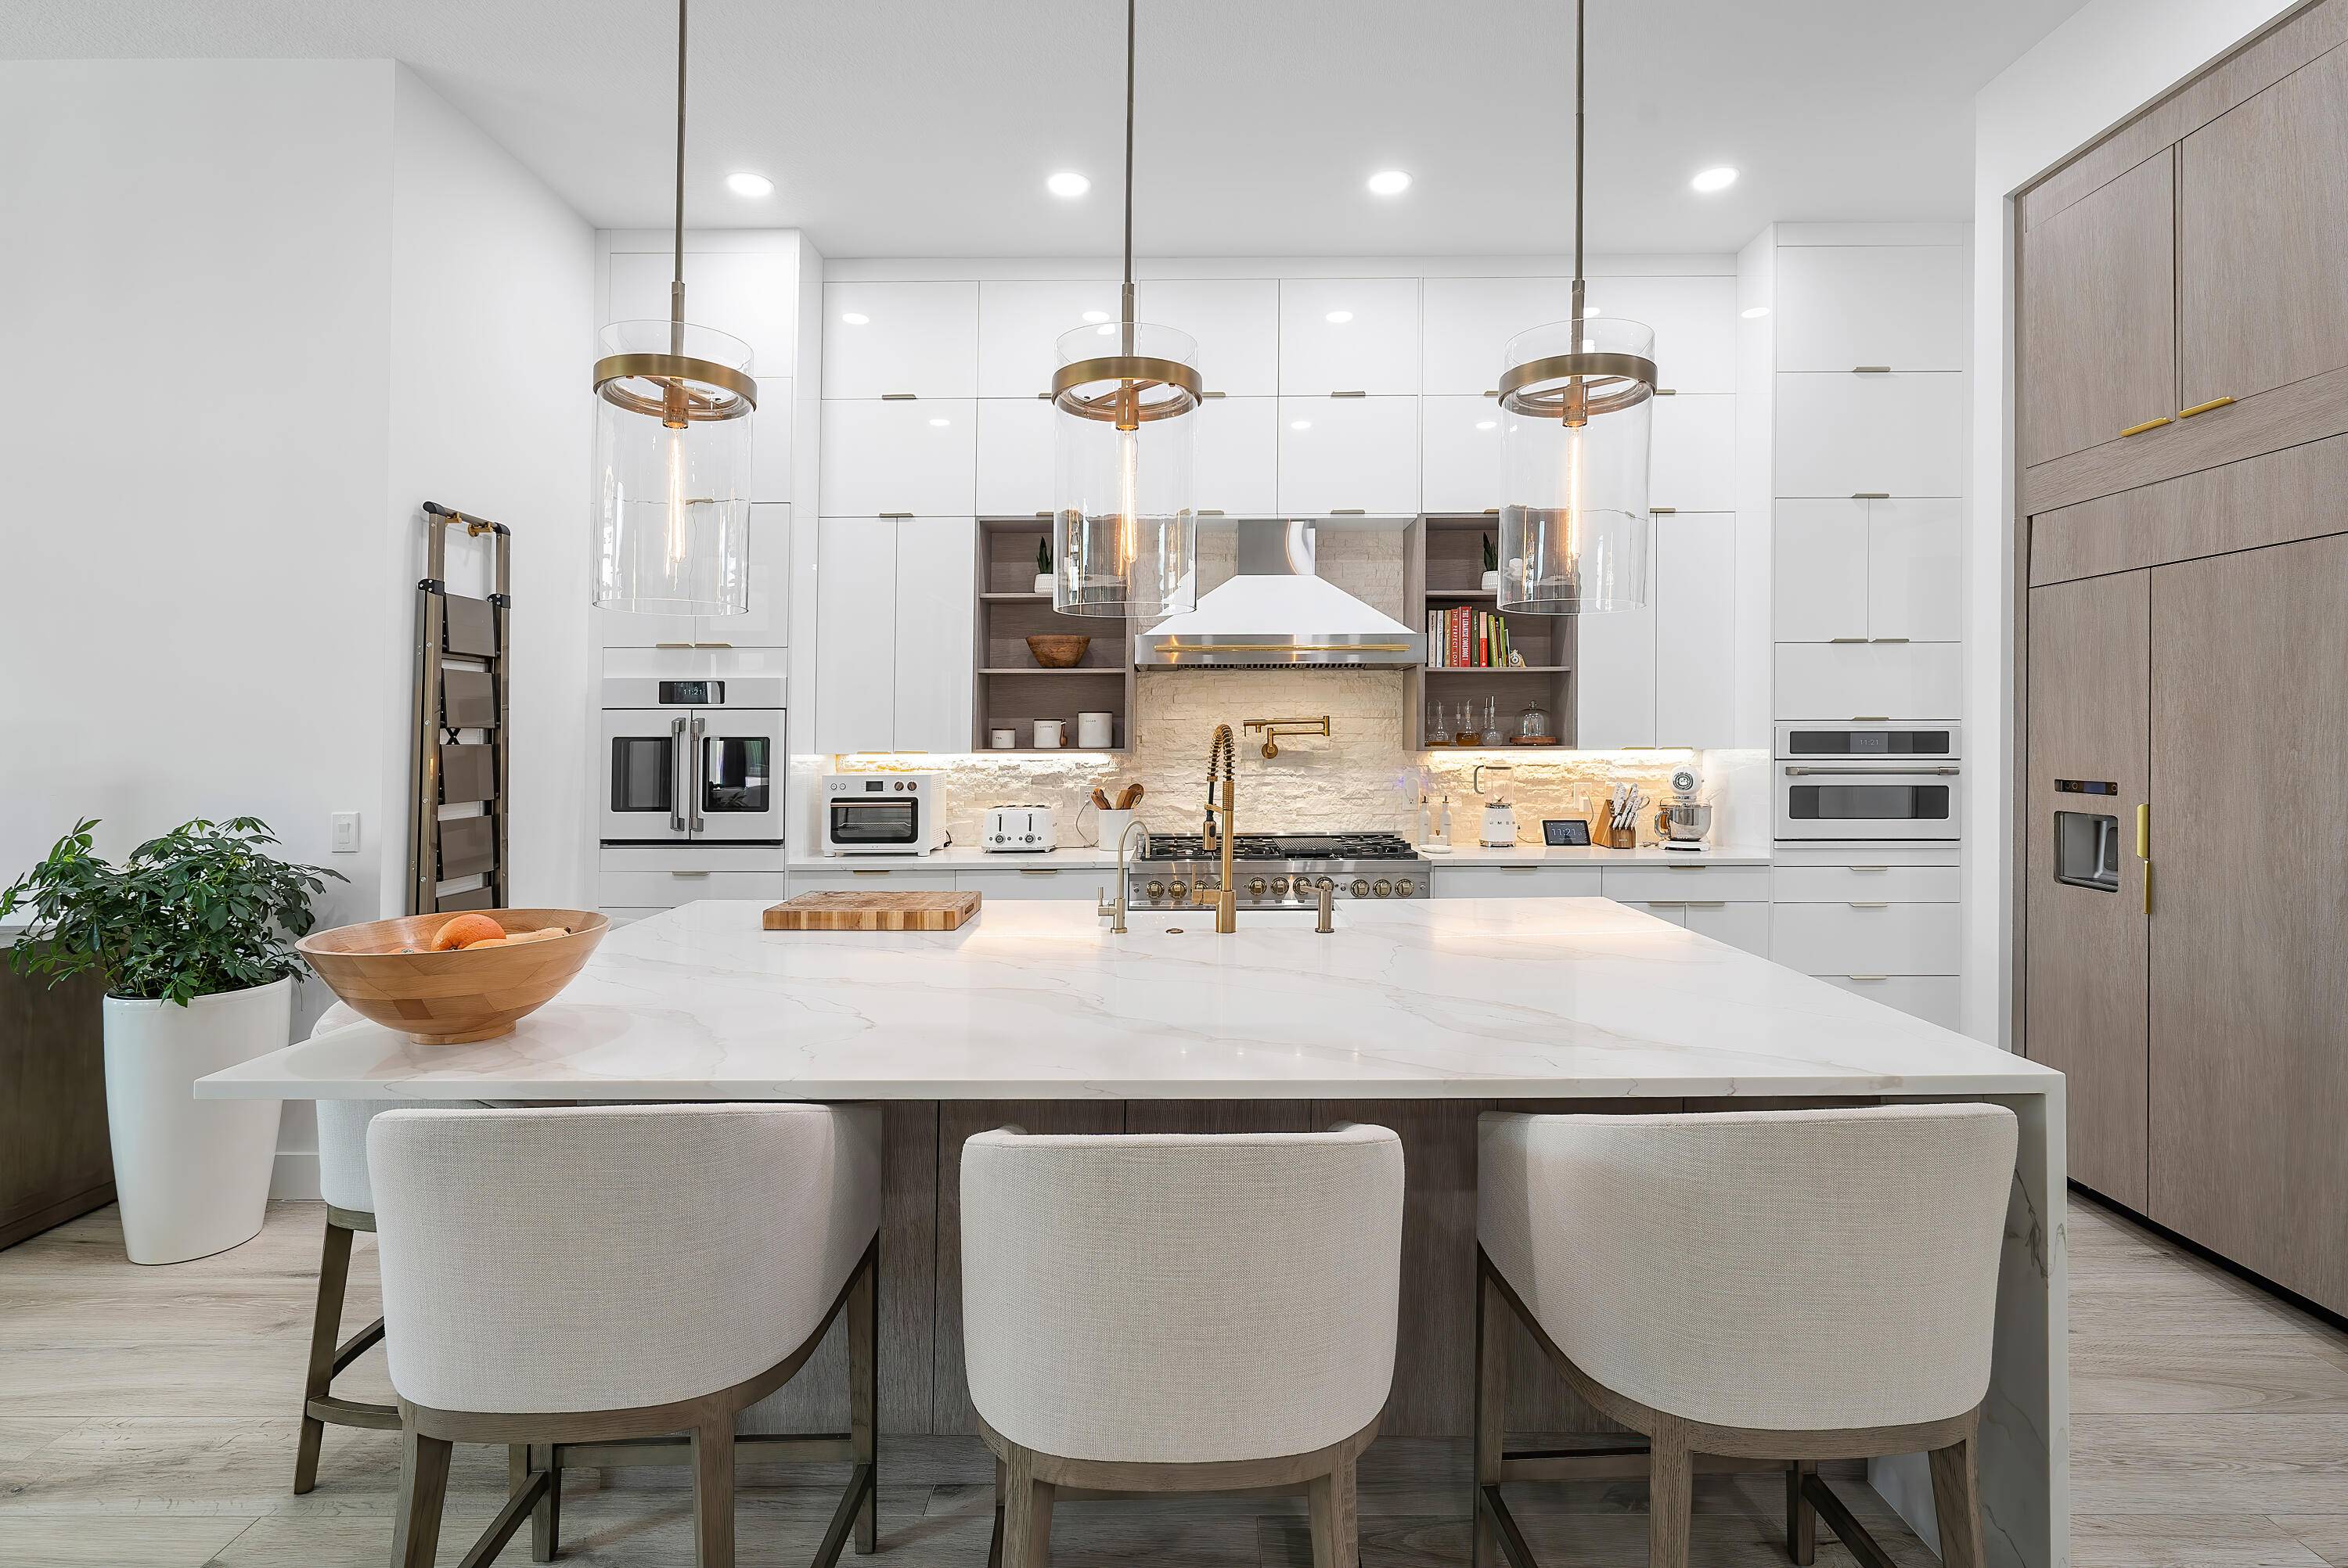 Spectacular 5 bed, 4 1 2 bath single family home in prestigious Palm Meadow Estates has been fully renovated with inspiration and most lighting from Restoration Hardware.